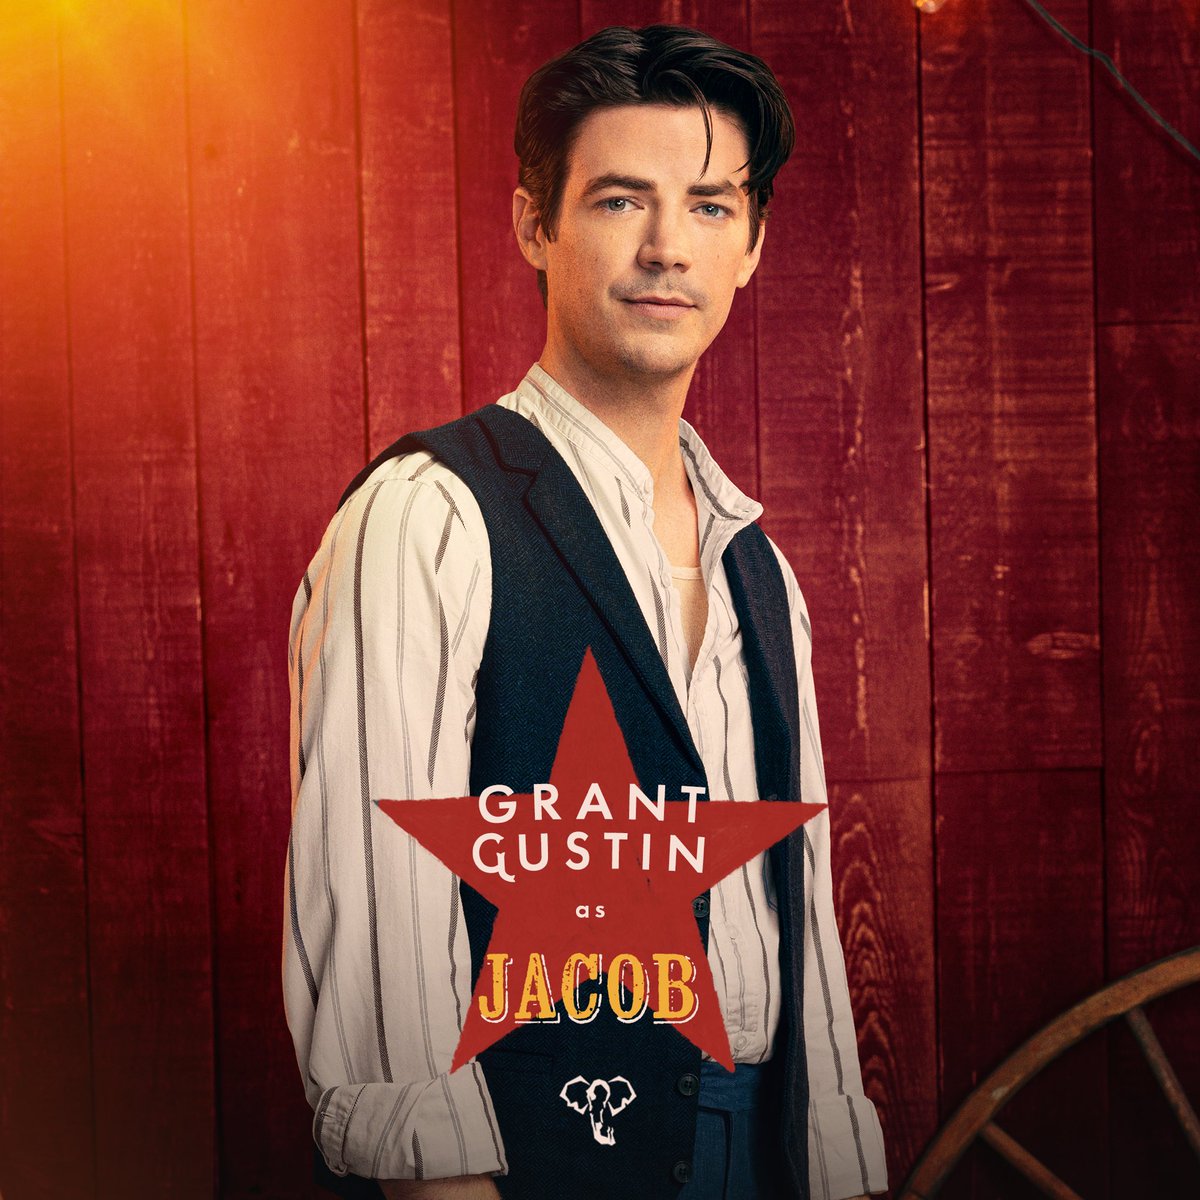 Meet Jacob Jankowski 🐘 (Grant Gustin): A young man with strong values and a stubborn sense of fair play, Jacob’s pre-determined life is suddenly shattered by loss. He hops a random train out of sheer desperation, hoping to find a new reason for being, somewhere, anywhere.